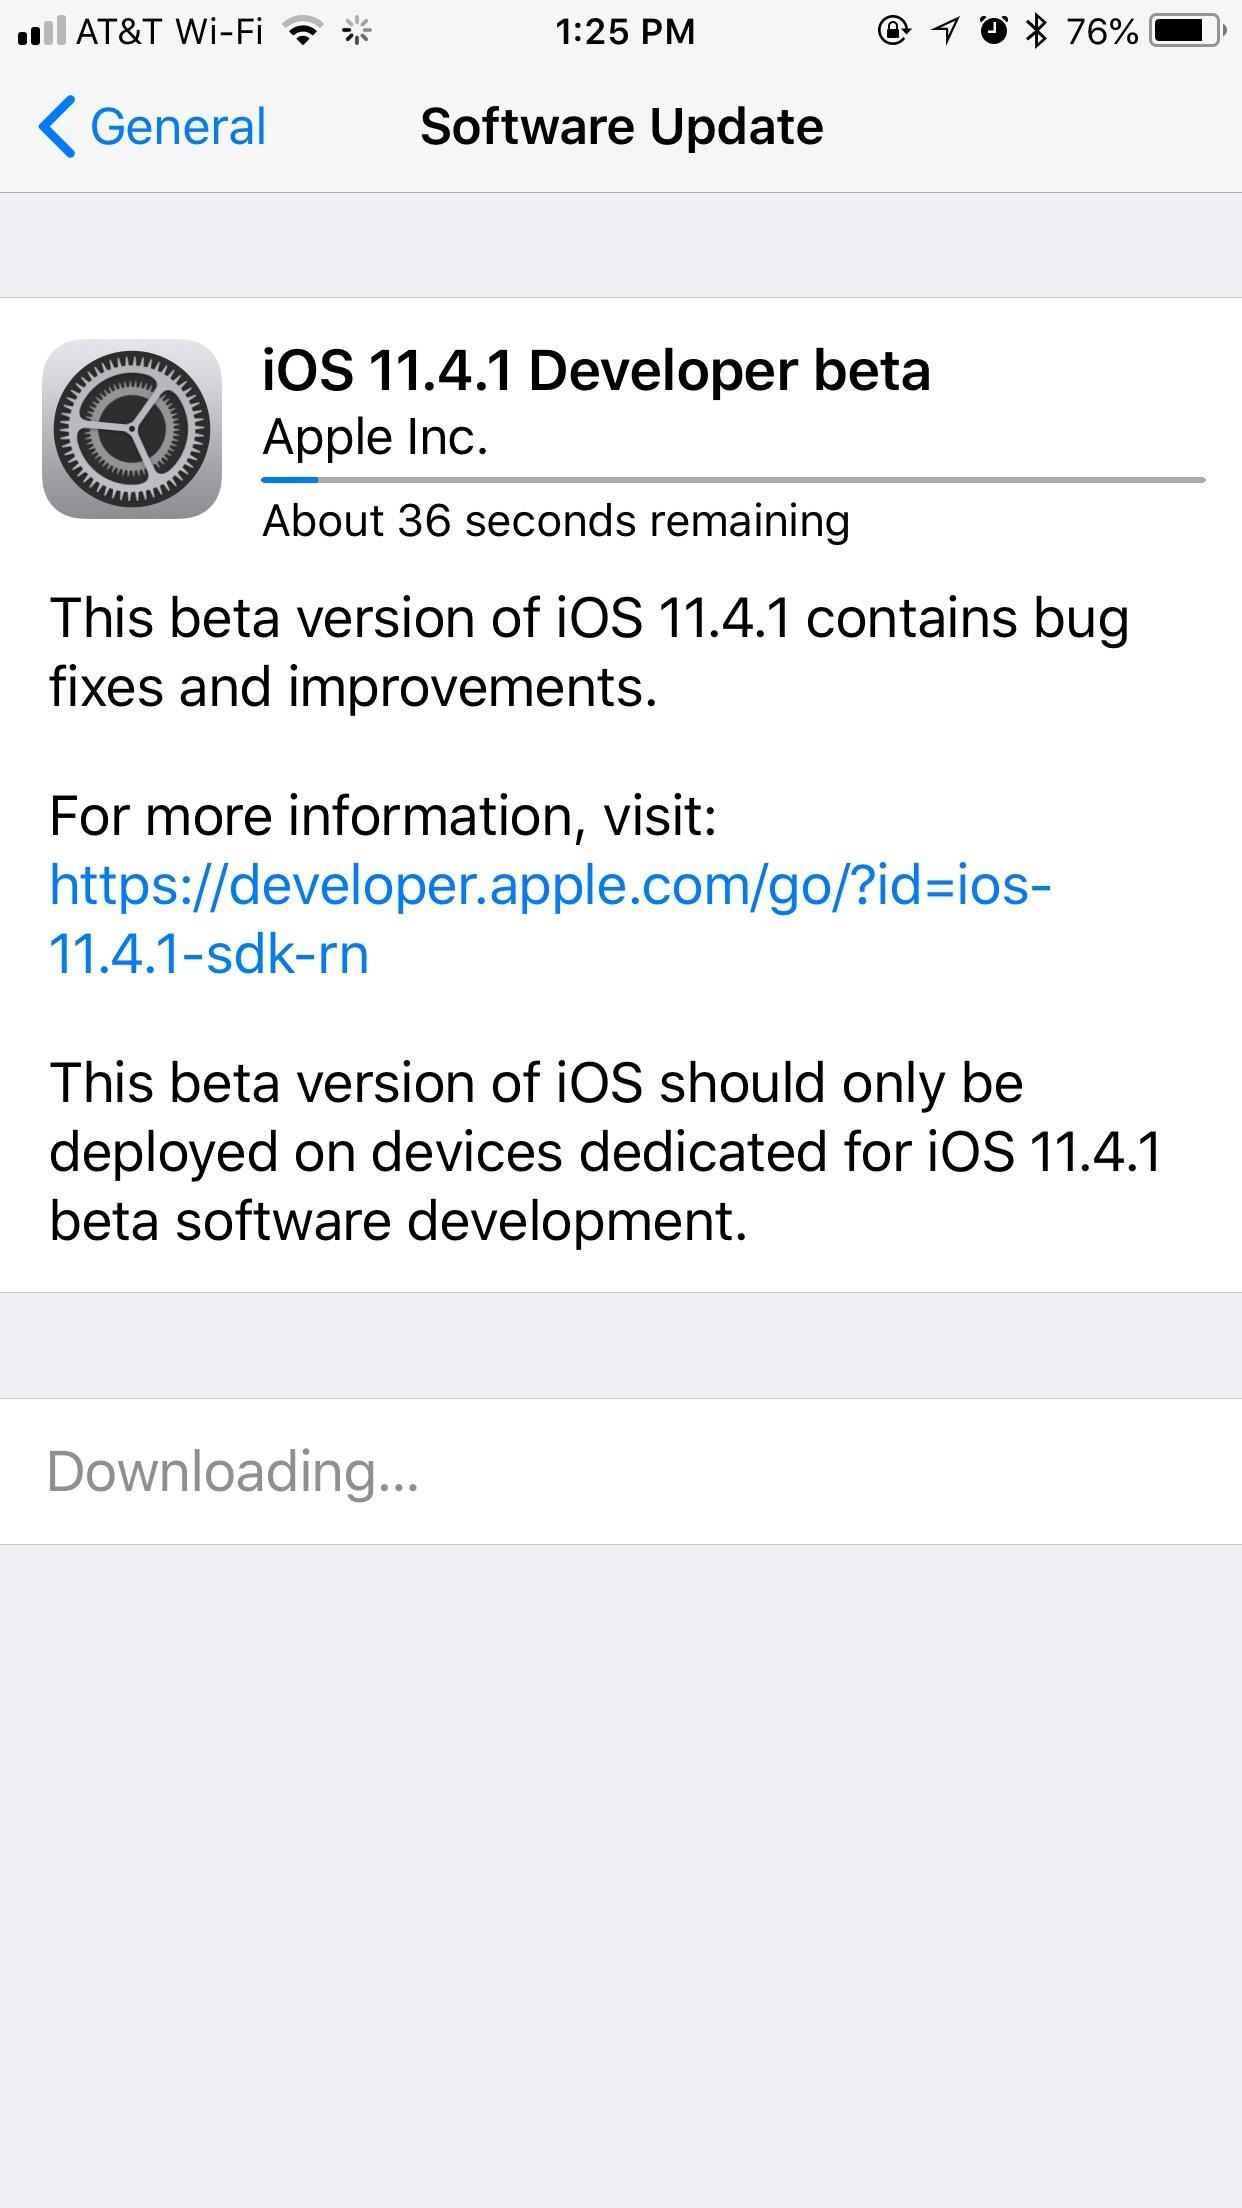 iOS 11.4.1 Beta Released for iPhones, Includes 'Bug Fixes & Improvements' Only